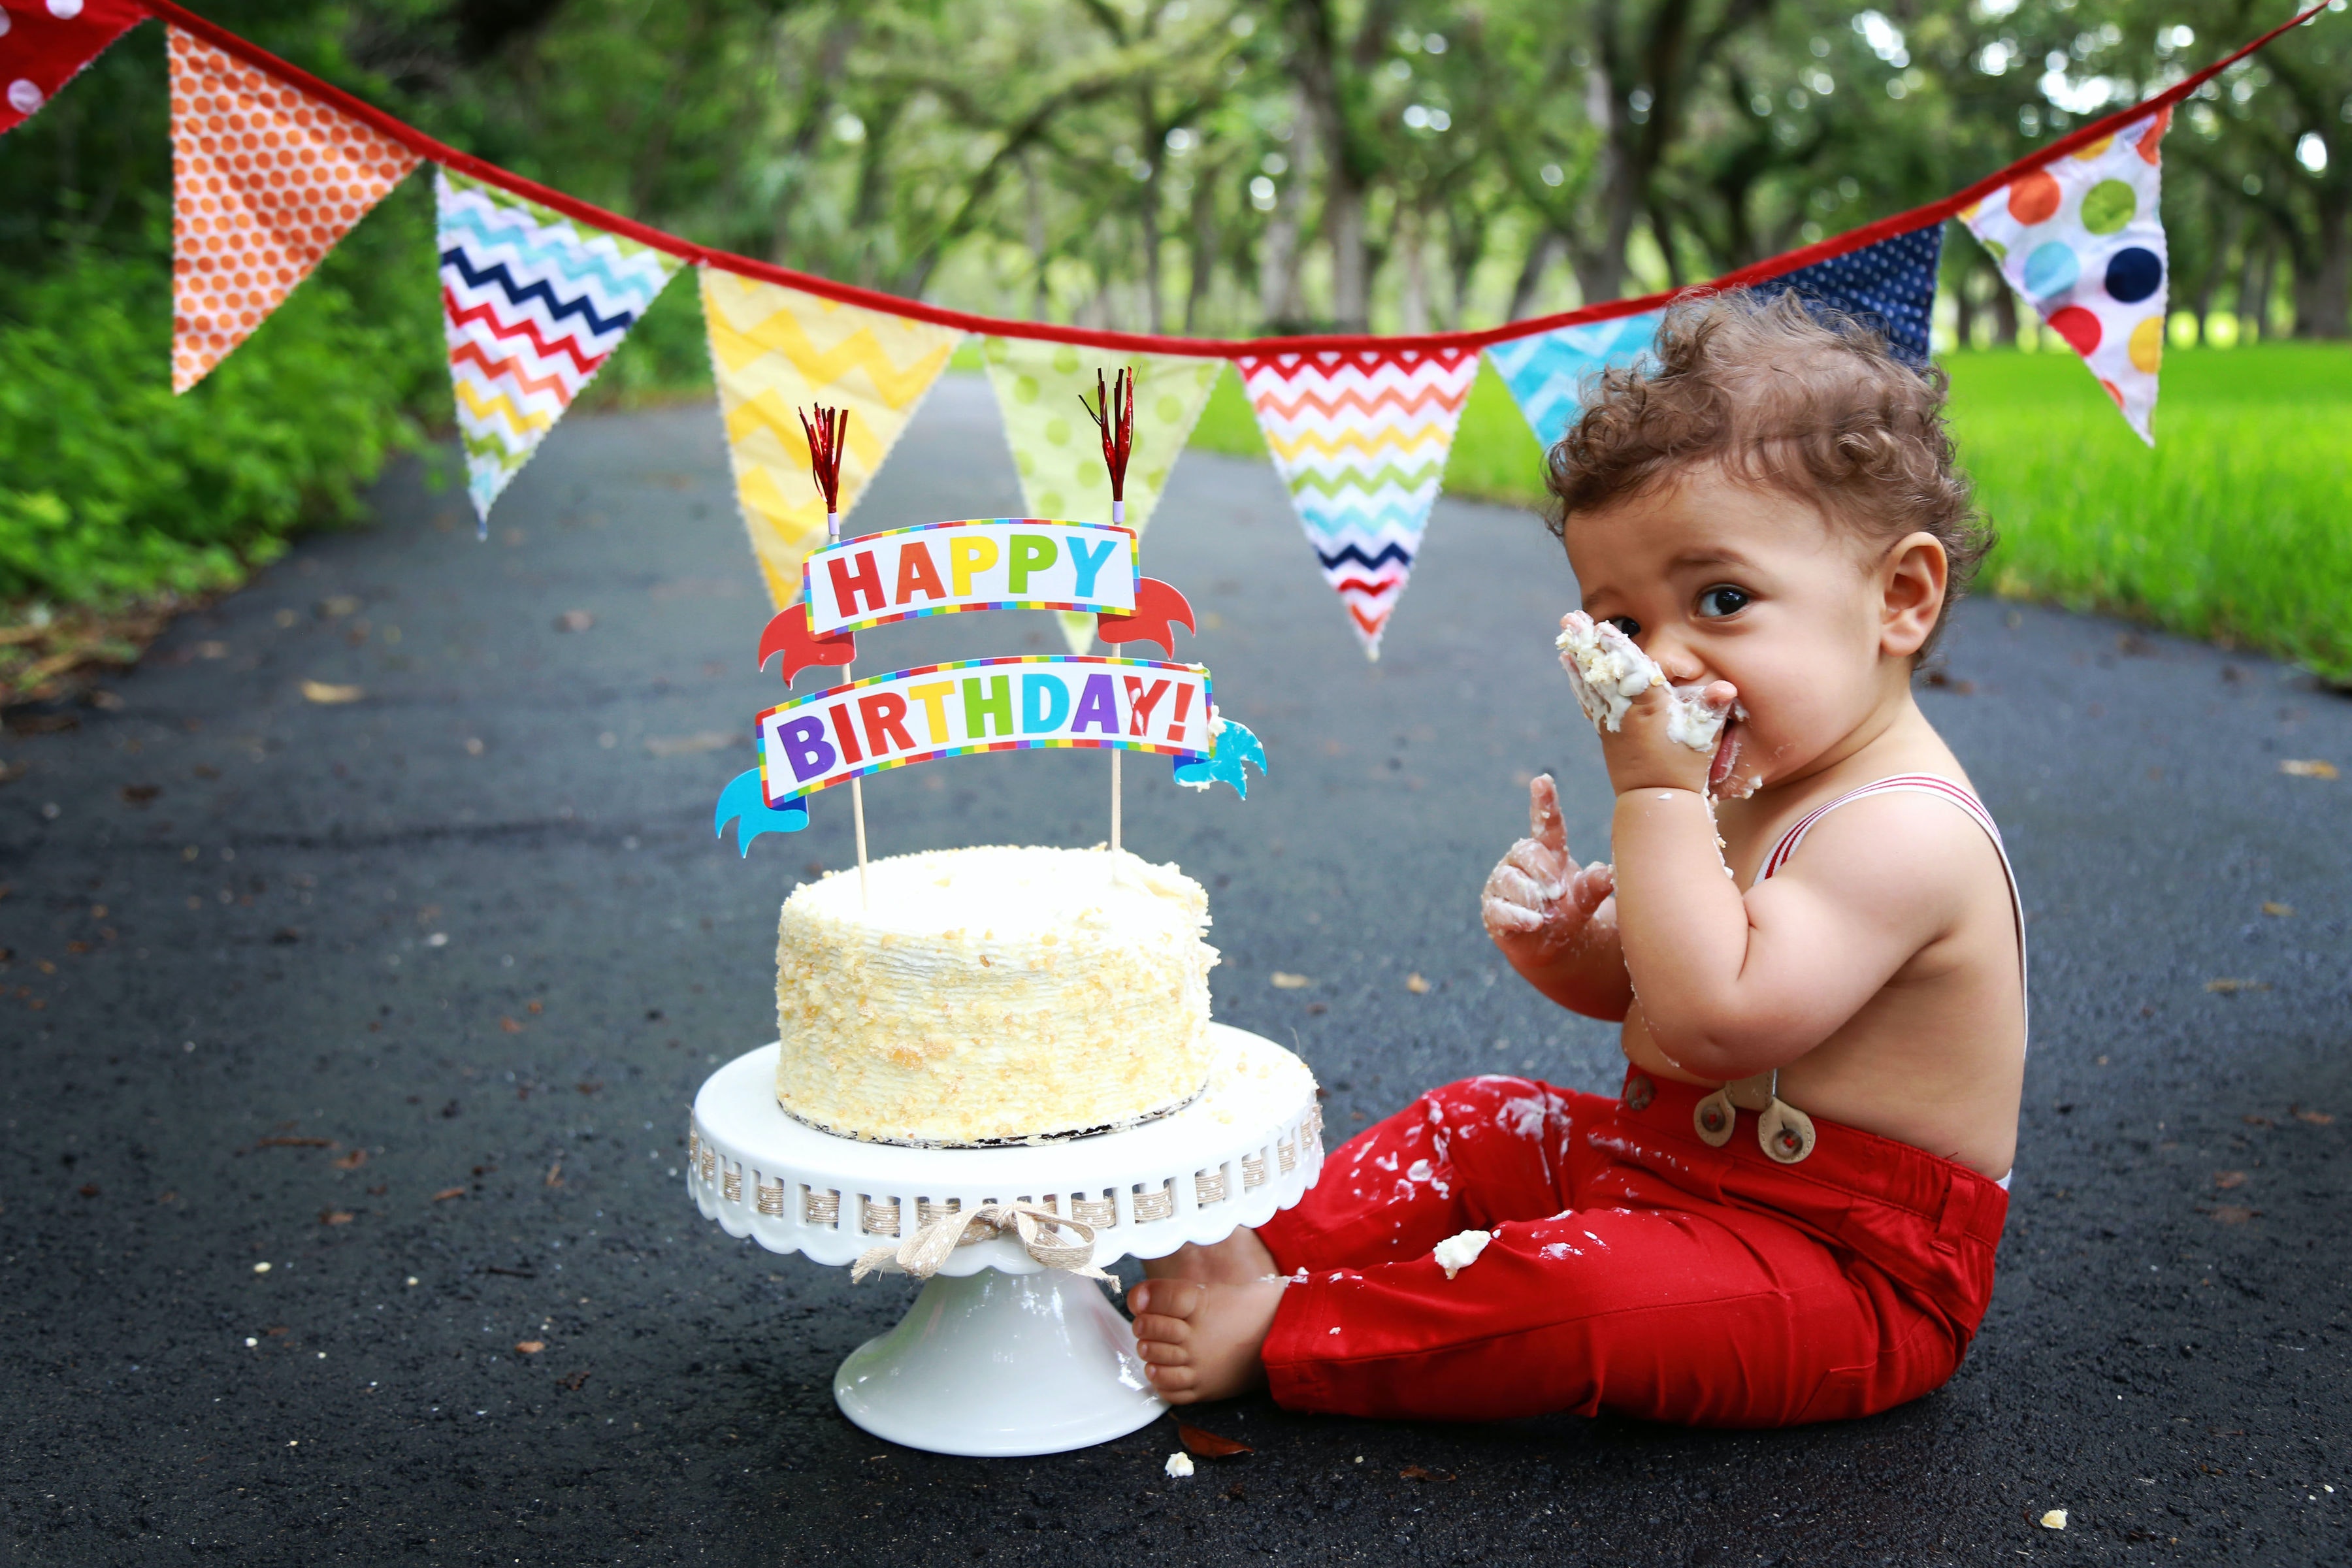 Baby eating birthday cake with a happy birthday sign and bunting in the background